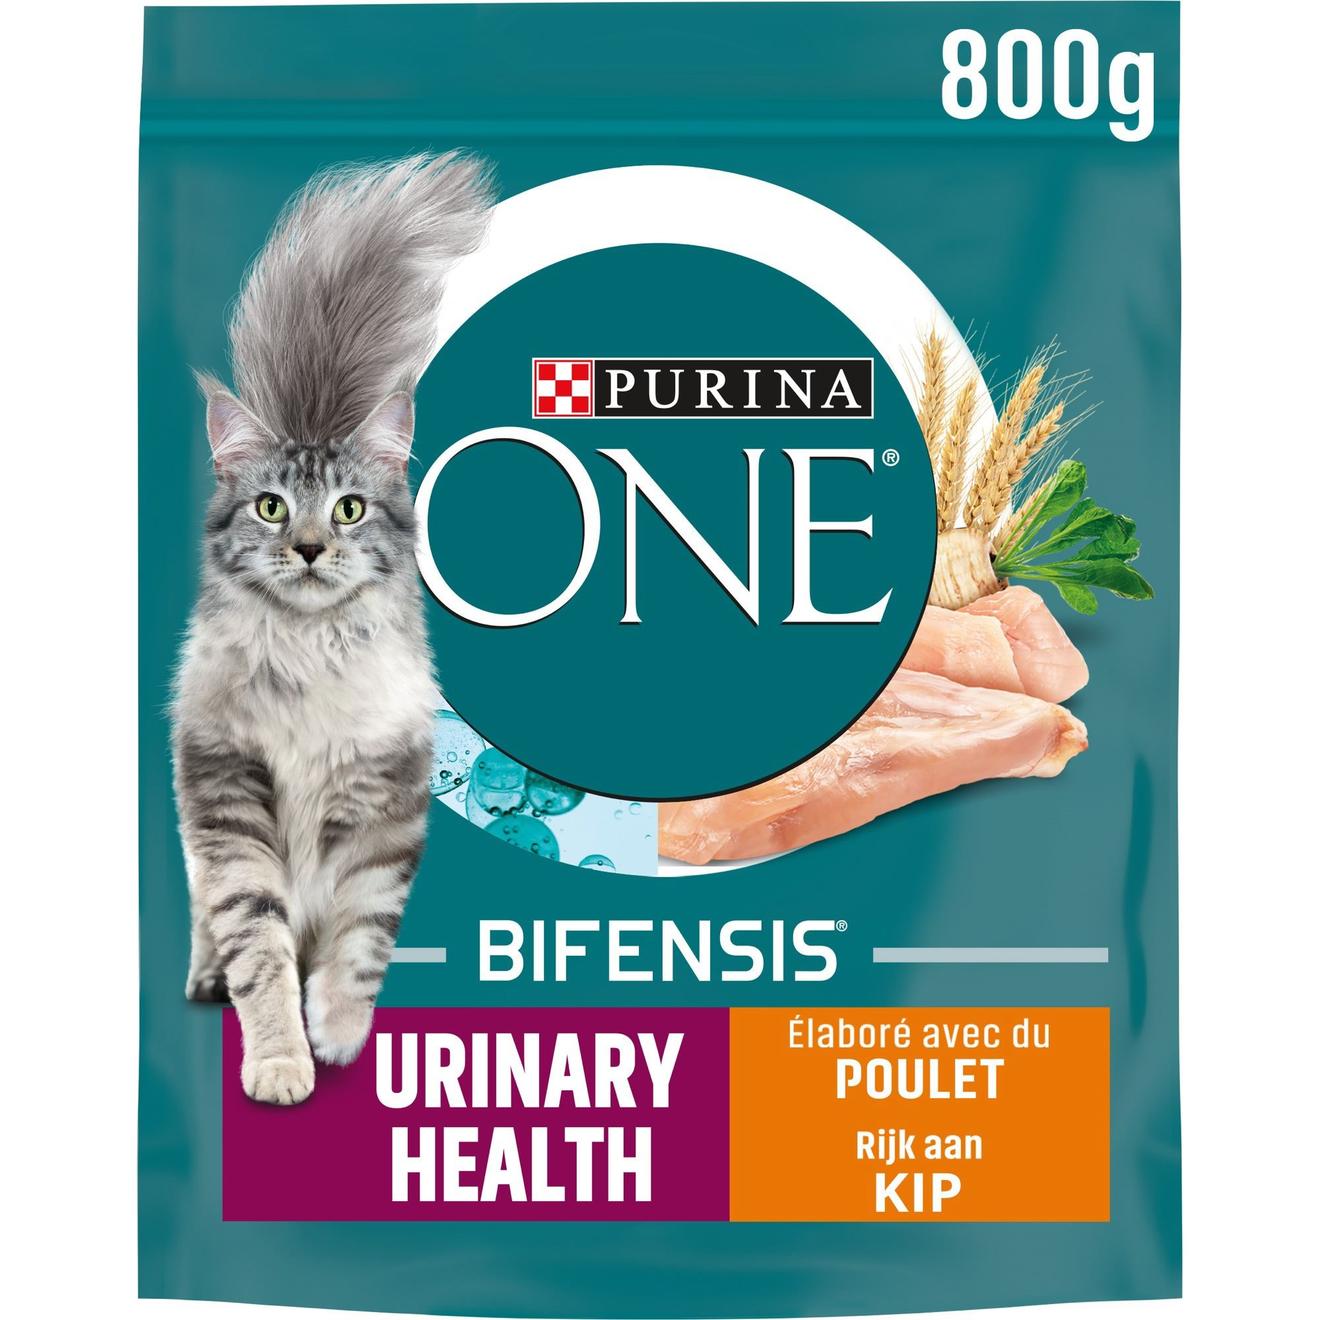 Purina one bifensis® urinary care chat poulet  800g offre à 7,39€ sur Tom & Co